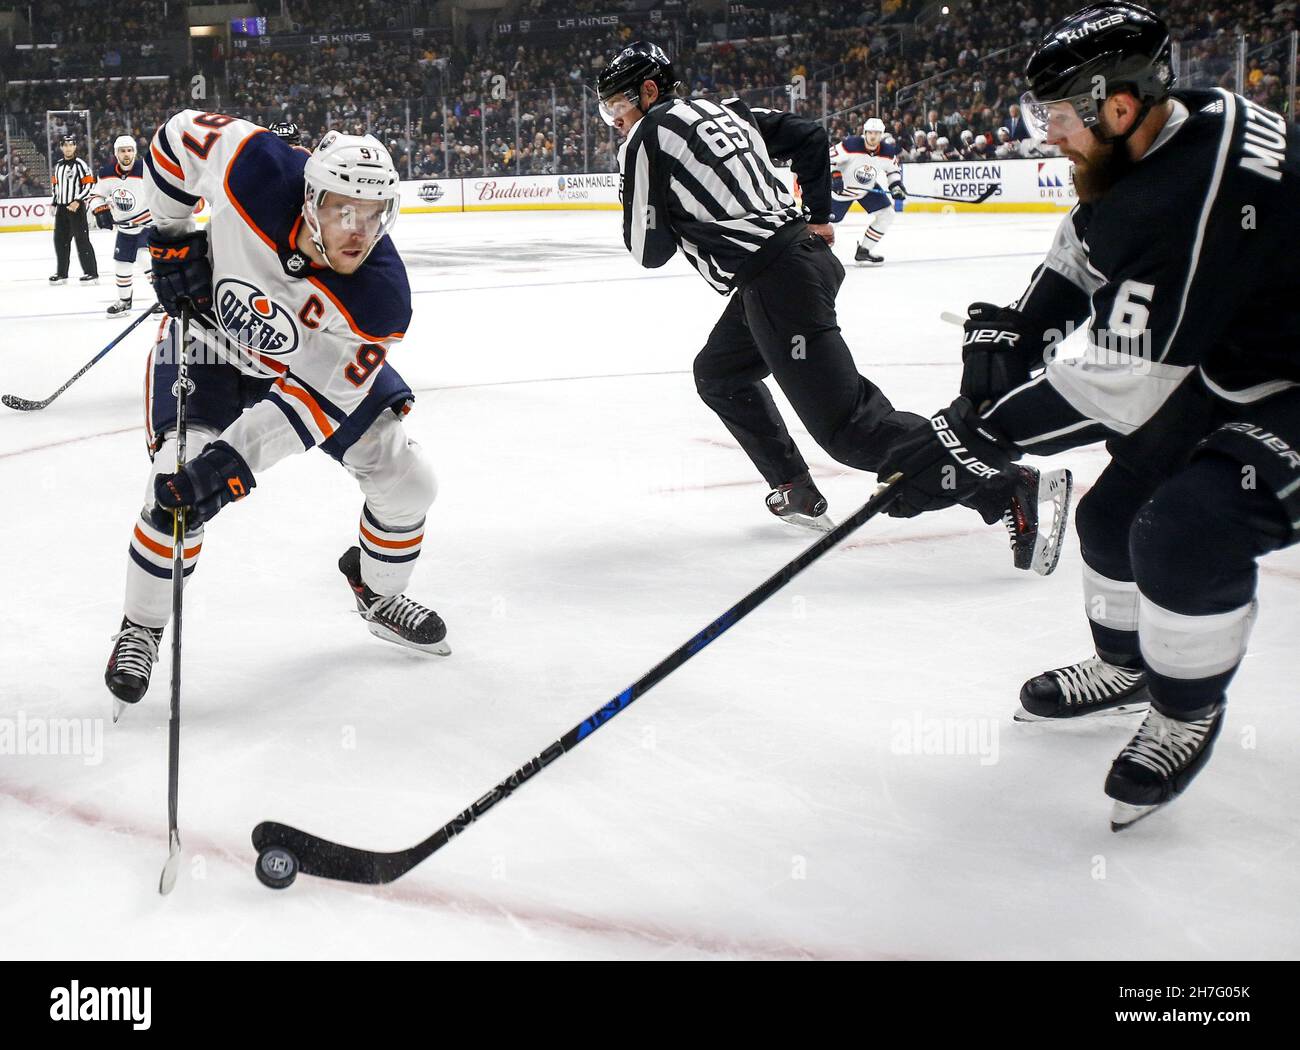 Beijing, USA. 24th Feb, 2018. Edmonton Oilers' Connor McDavid (L) vies with Los Angeles Kings' Jake Muzzin during a 2017-2018 NHL hockey game in Los Angeles, the United States, on Feb. 24, 2018. Credit: Zhao Hanrong/Xinhua/Alamy Live News Stock Photo